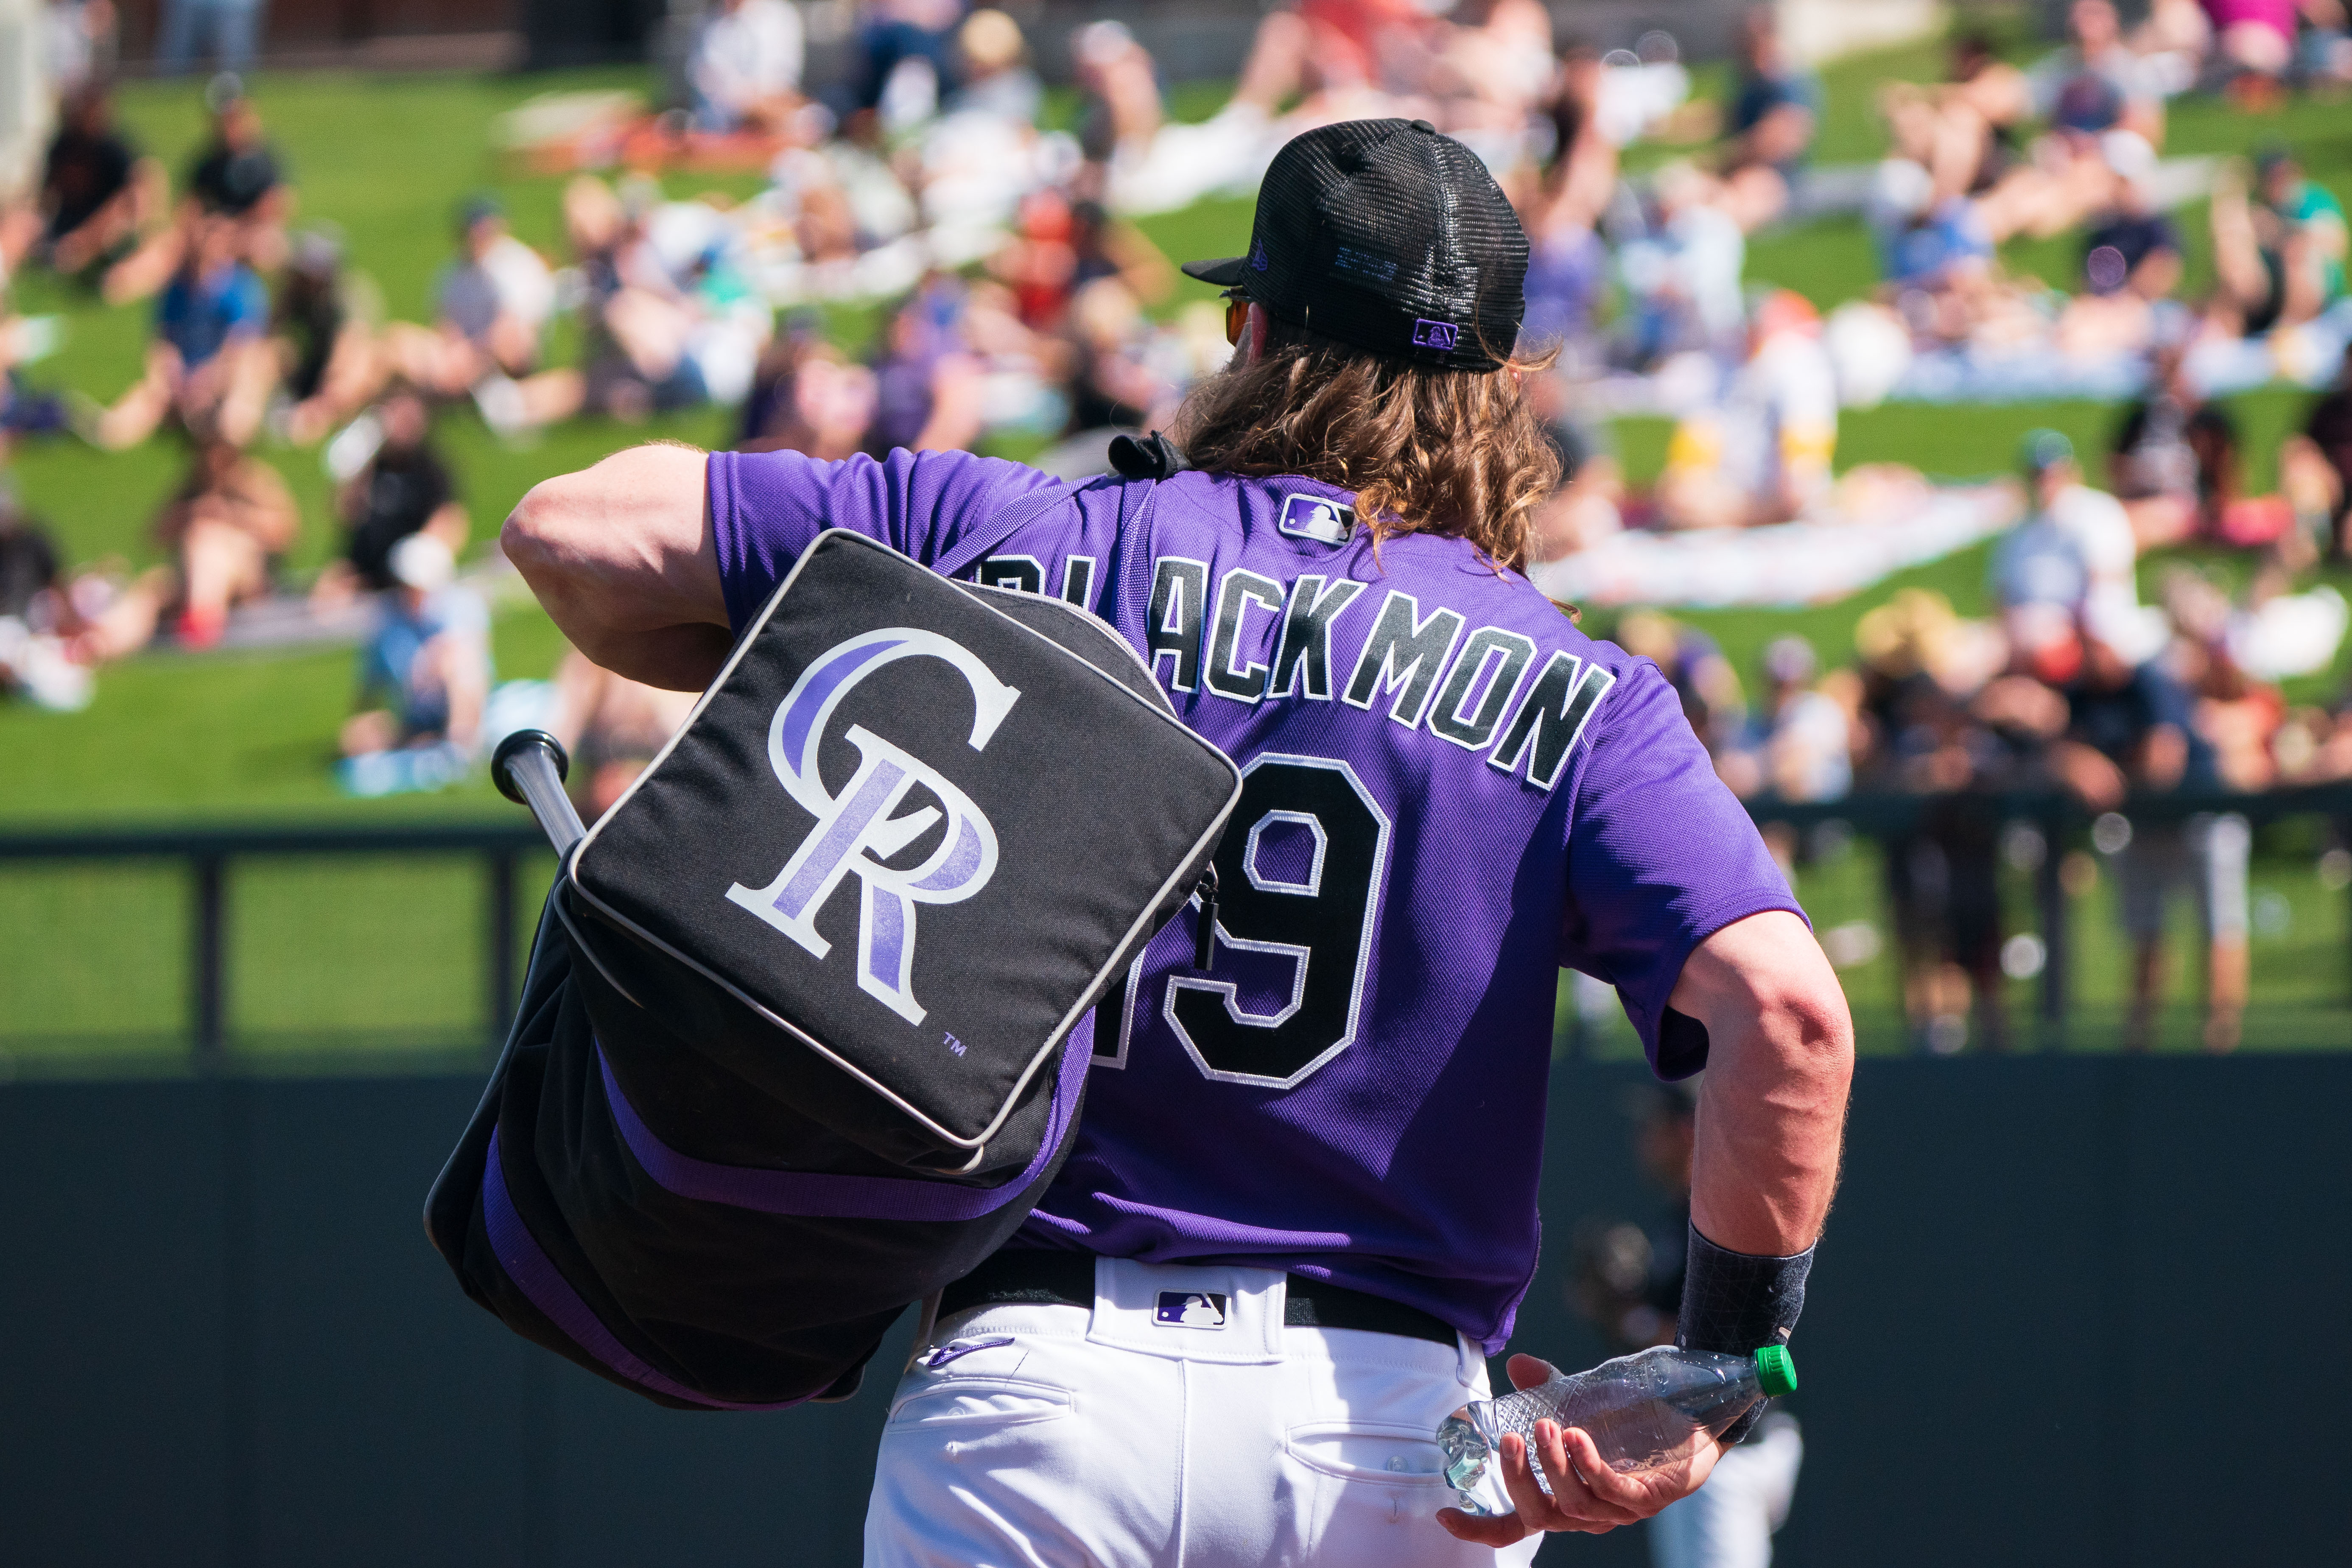 Projecting the Rockies' 2023 roster. Lots of holes to fill.